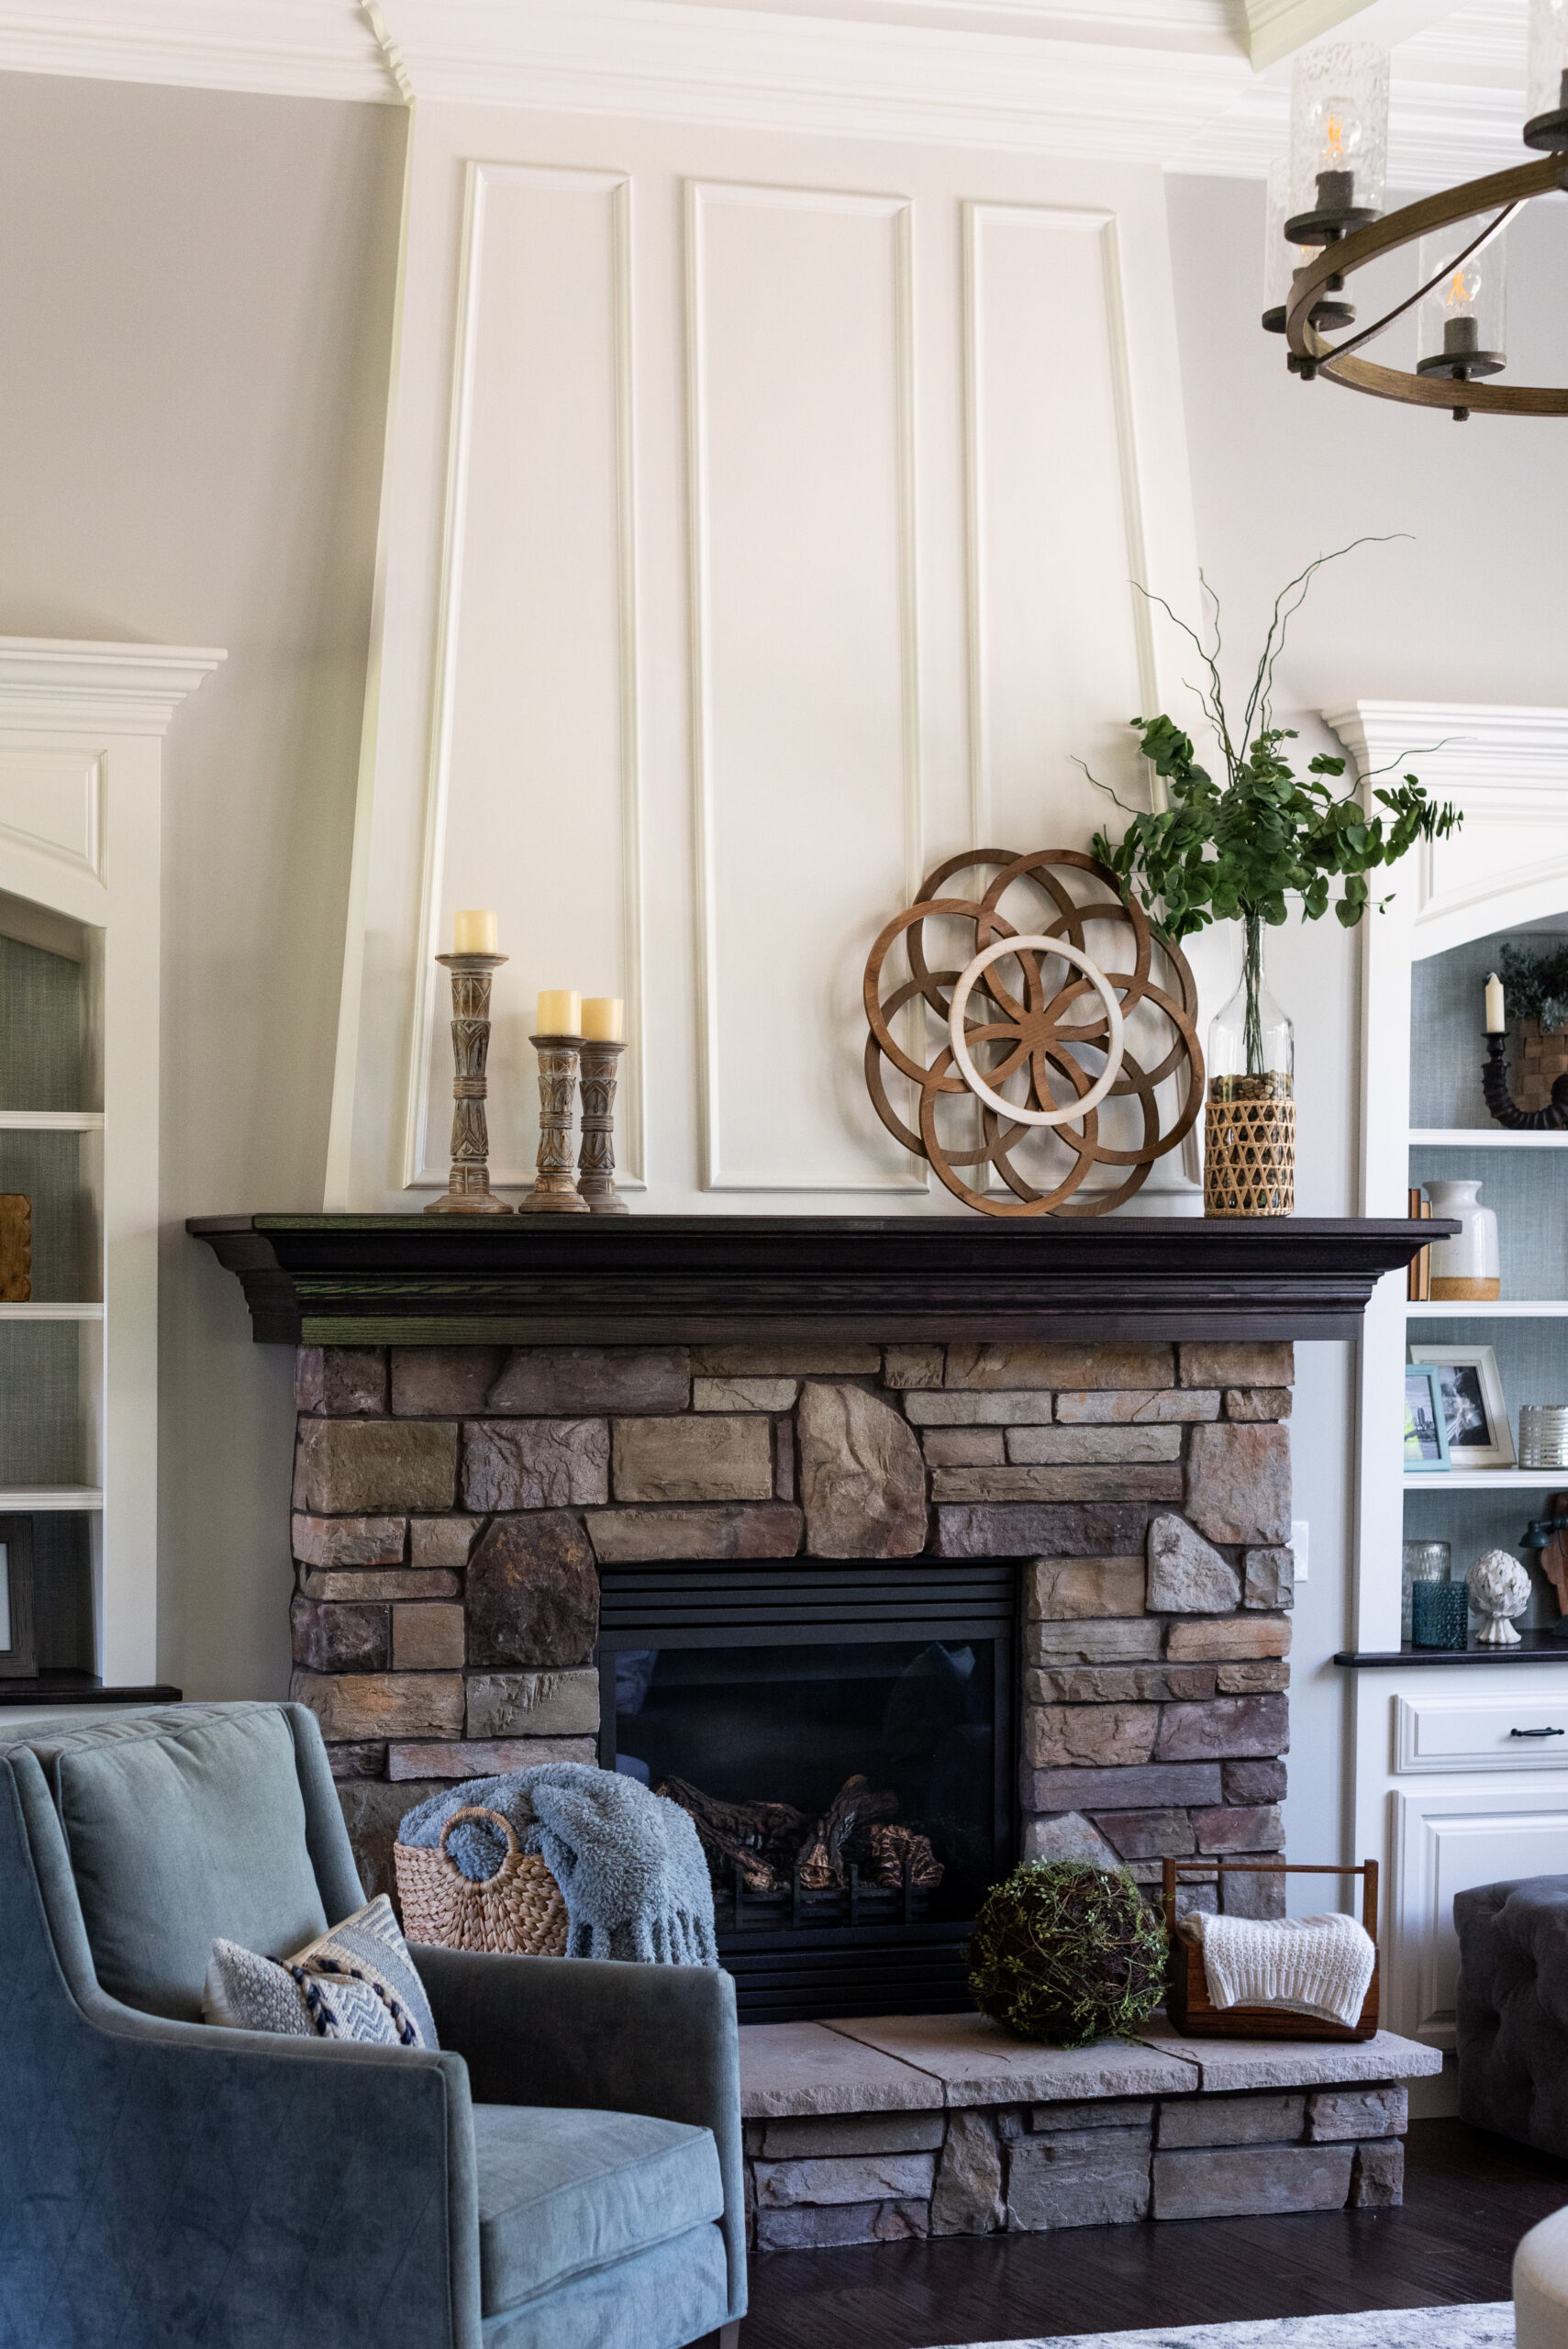 Living room stone fireplace and hearth with pillar candles and textured white molding to the ceiling